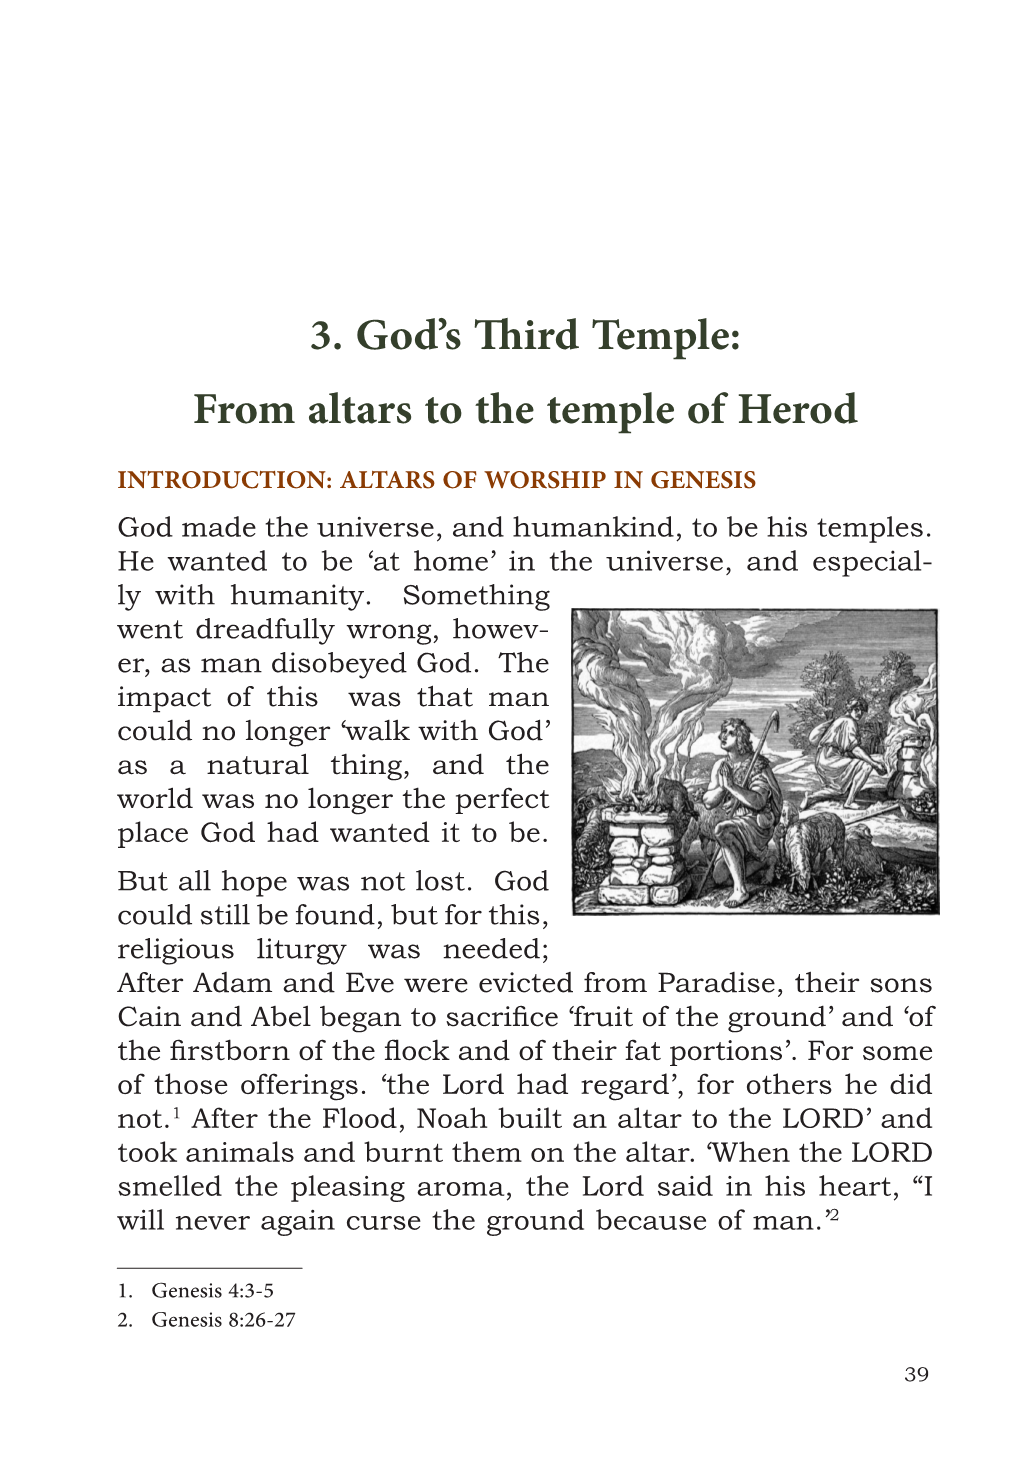 3. God's Third Temple: from Altars to the Temple of Herod